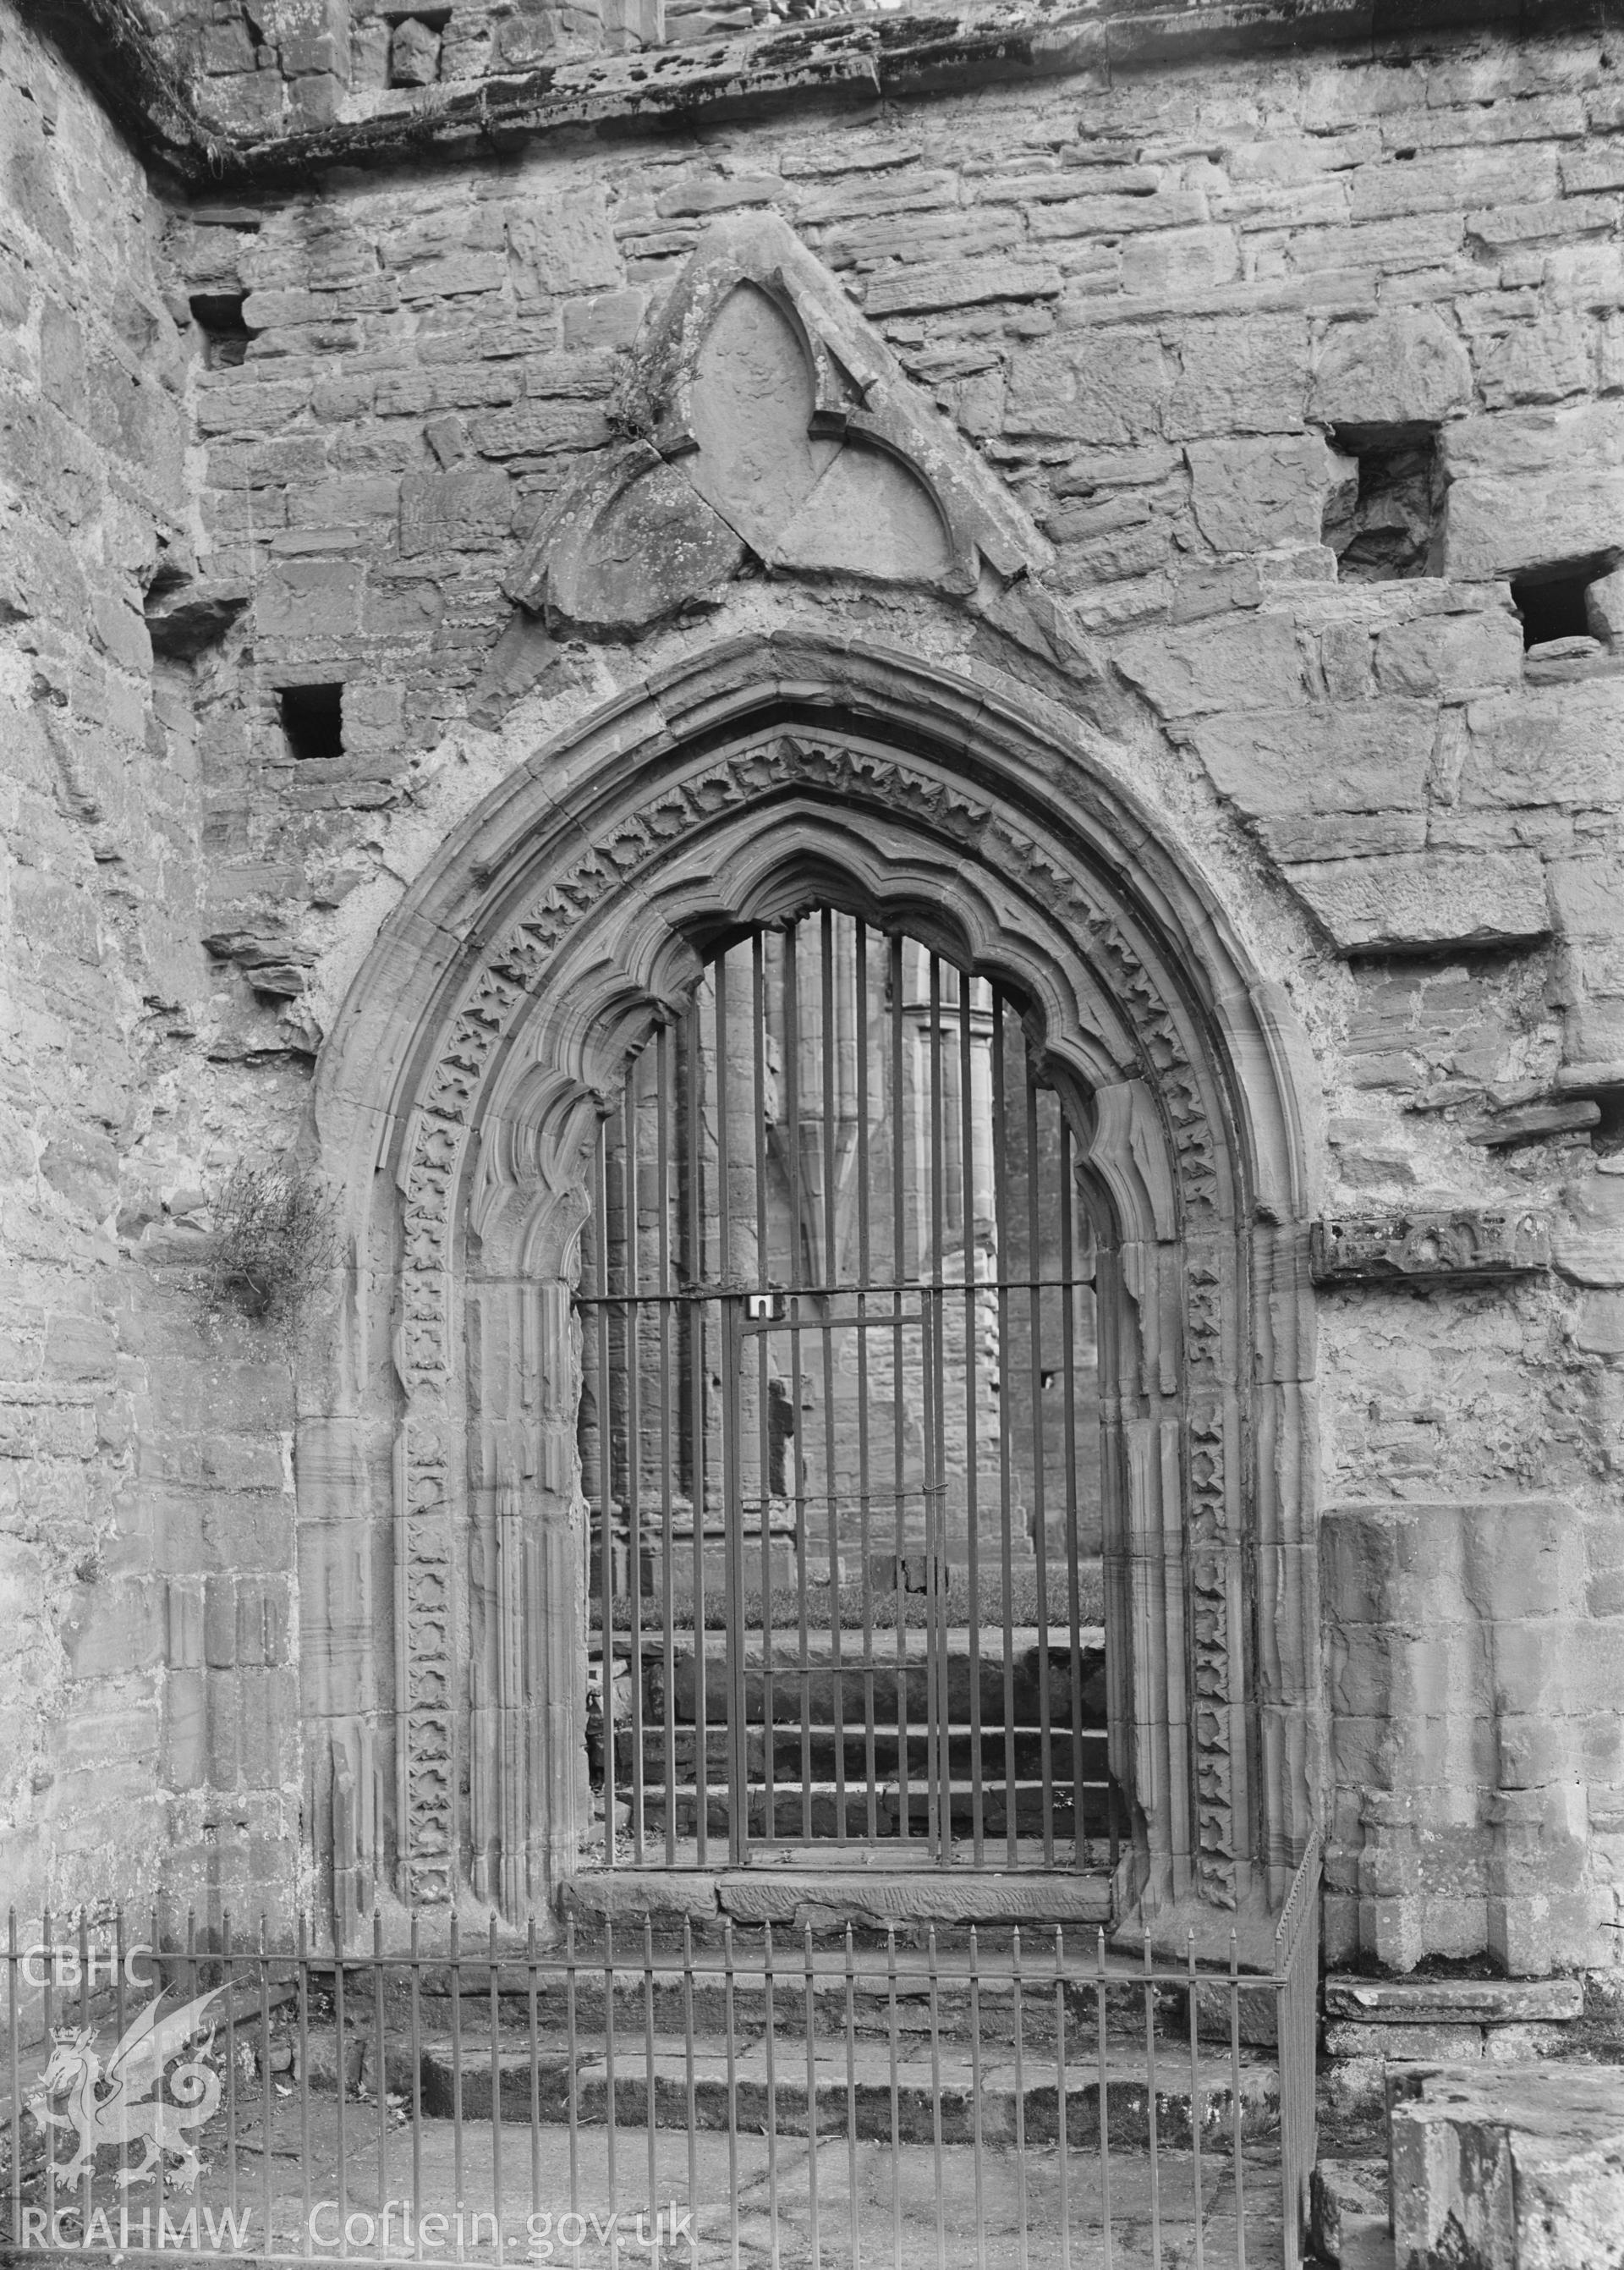 Black and white glass negative showing arched entrance at Tintern Abbey.